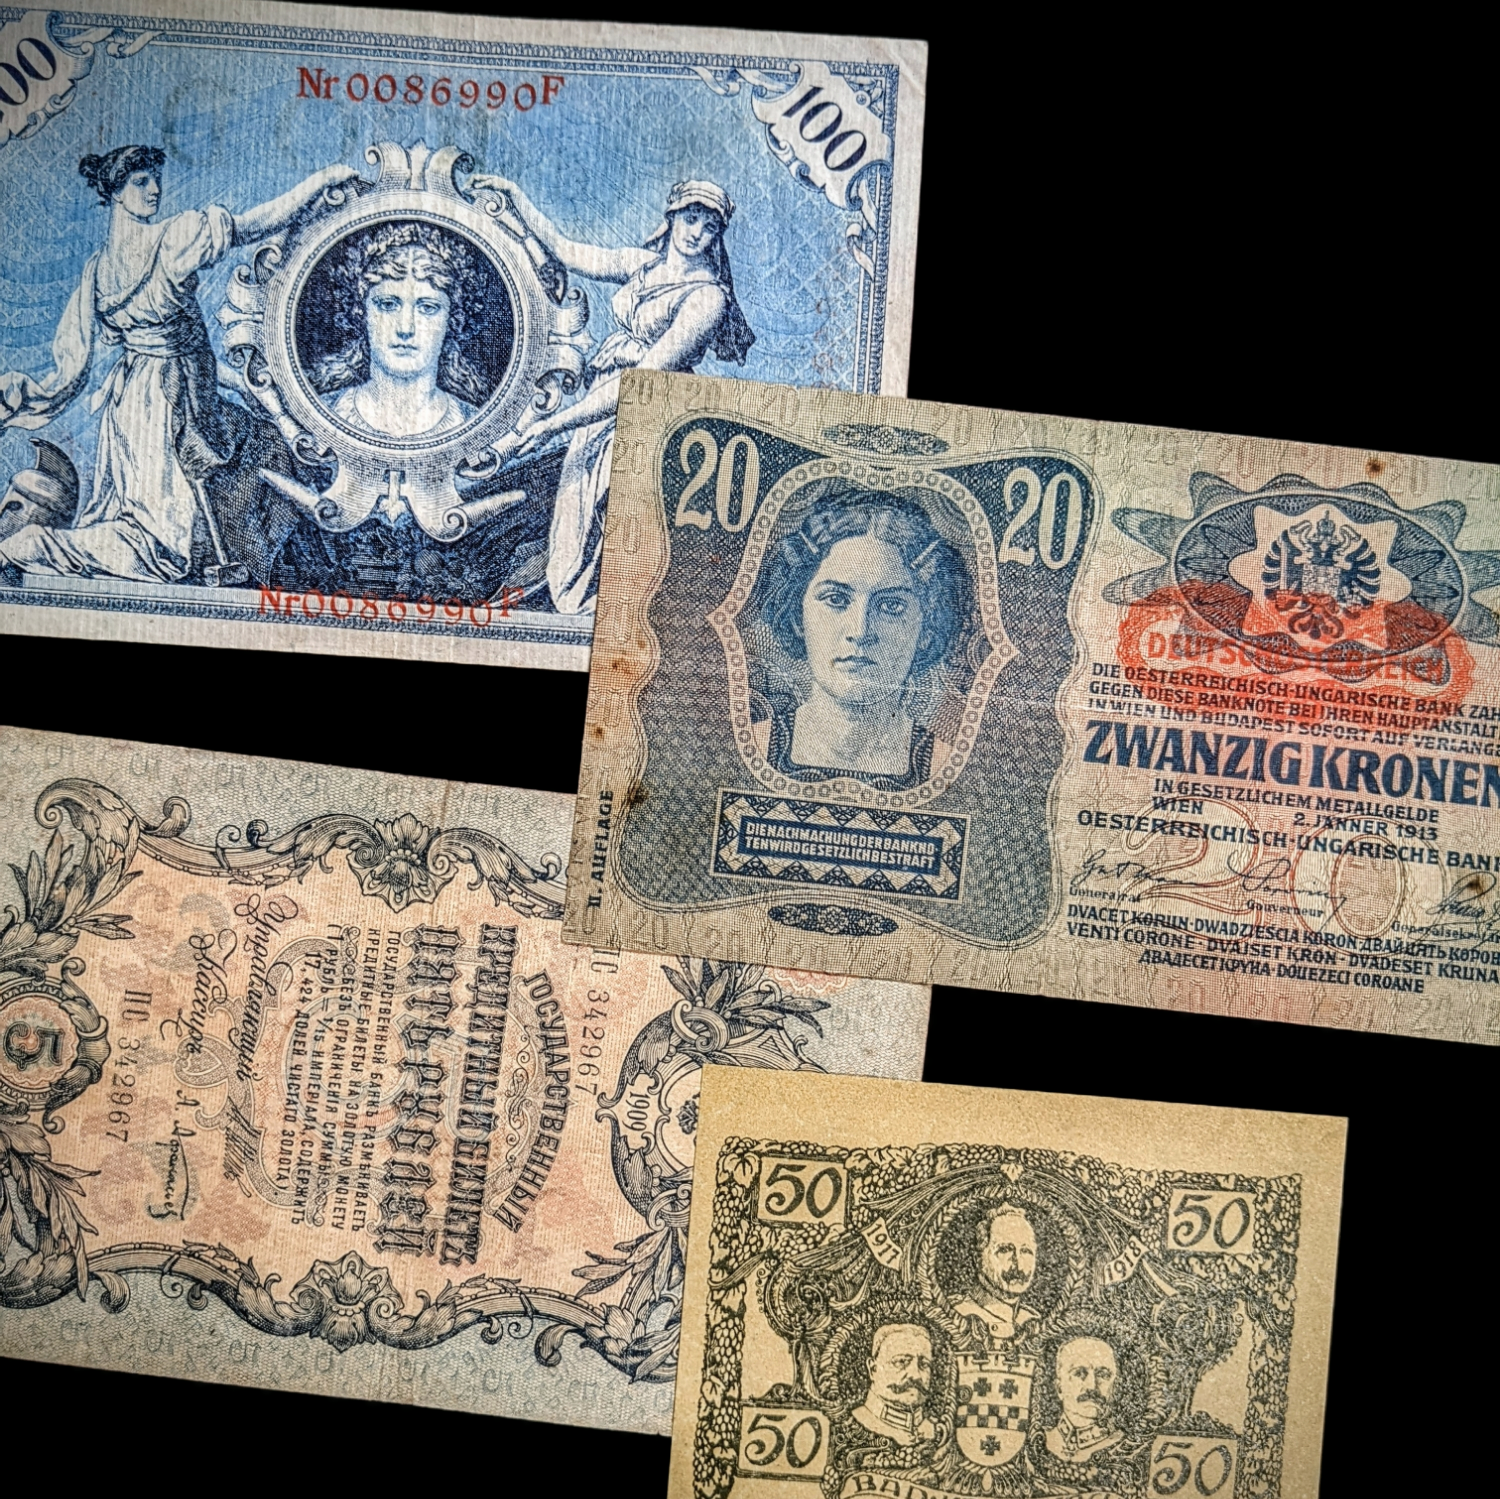 Last Royal Houses of Europe Notes - 1910's - Austria, Russia, Germany